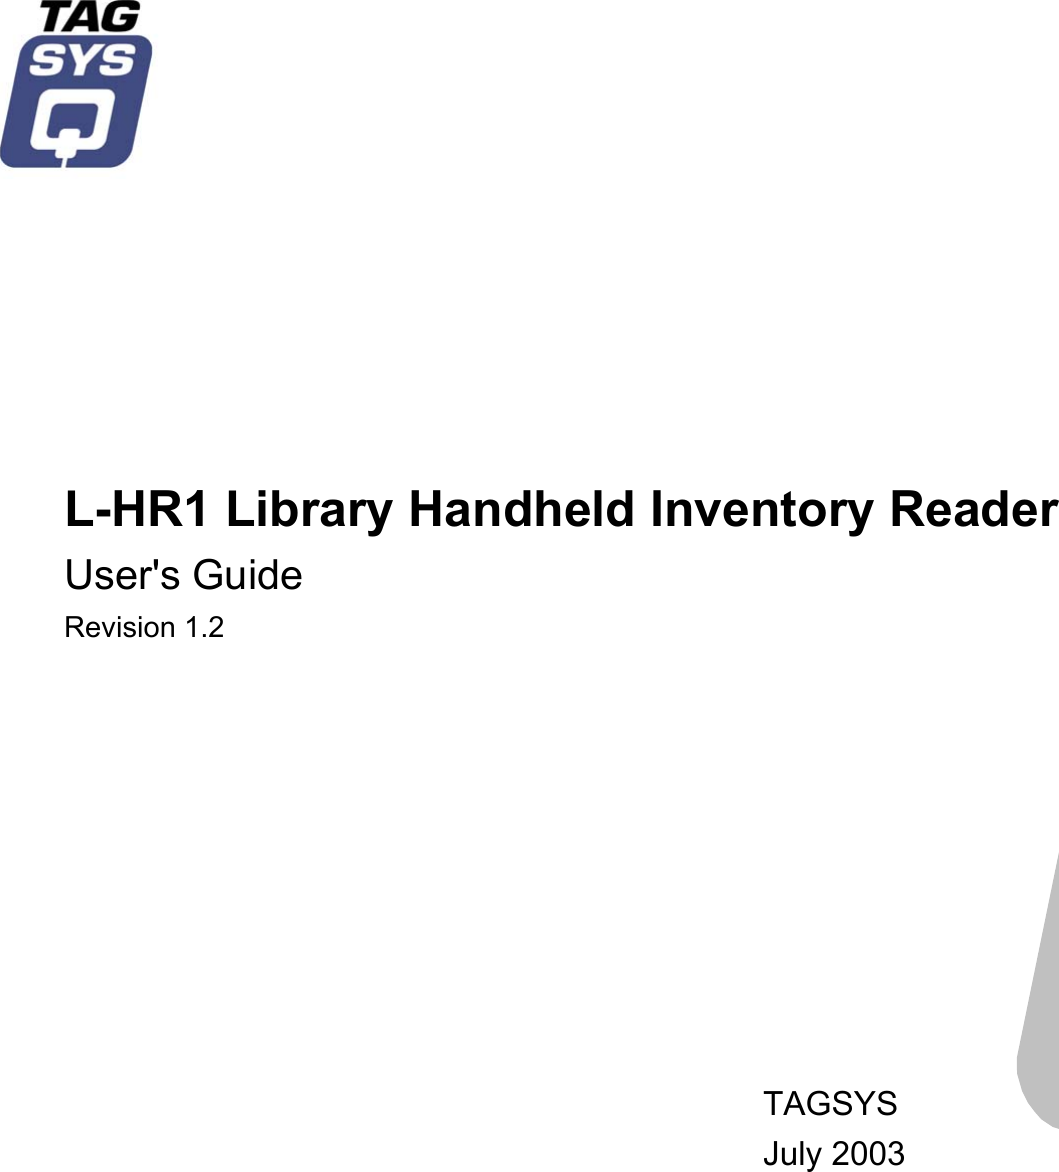               L-HR1 Library Handheld Inventory Reader User&apos;s Guide Revision 1.2            TAGSYS July 2003   